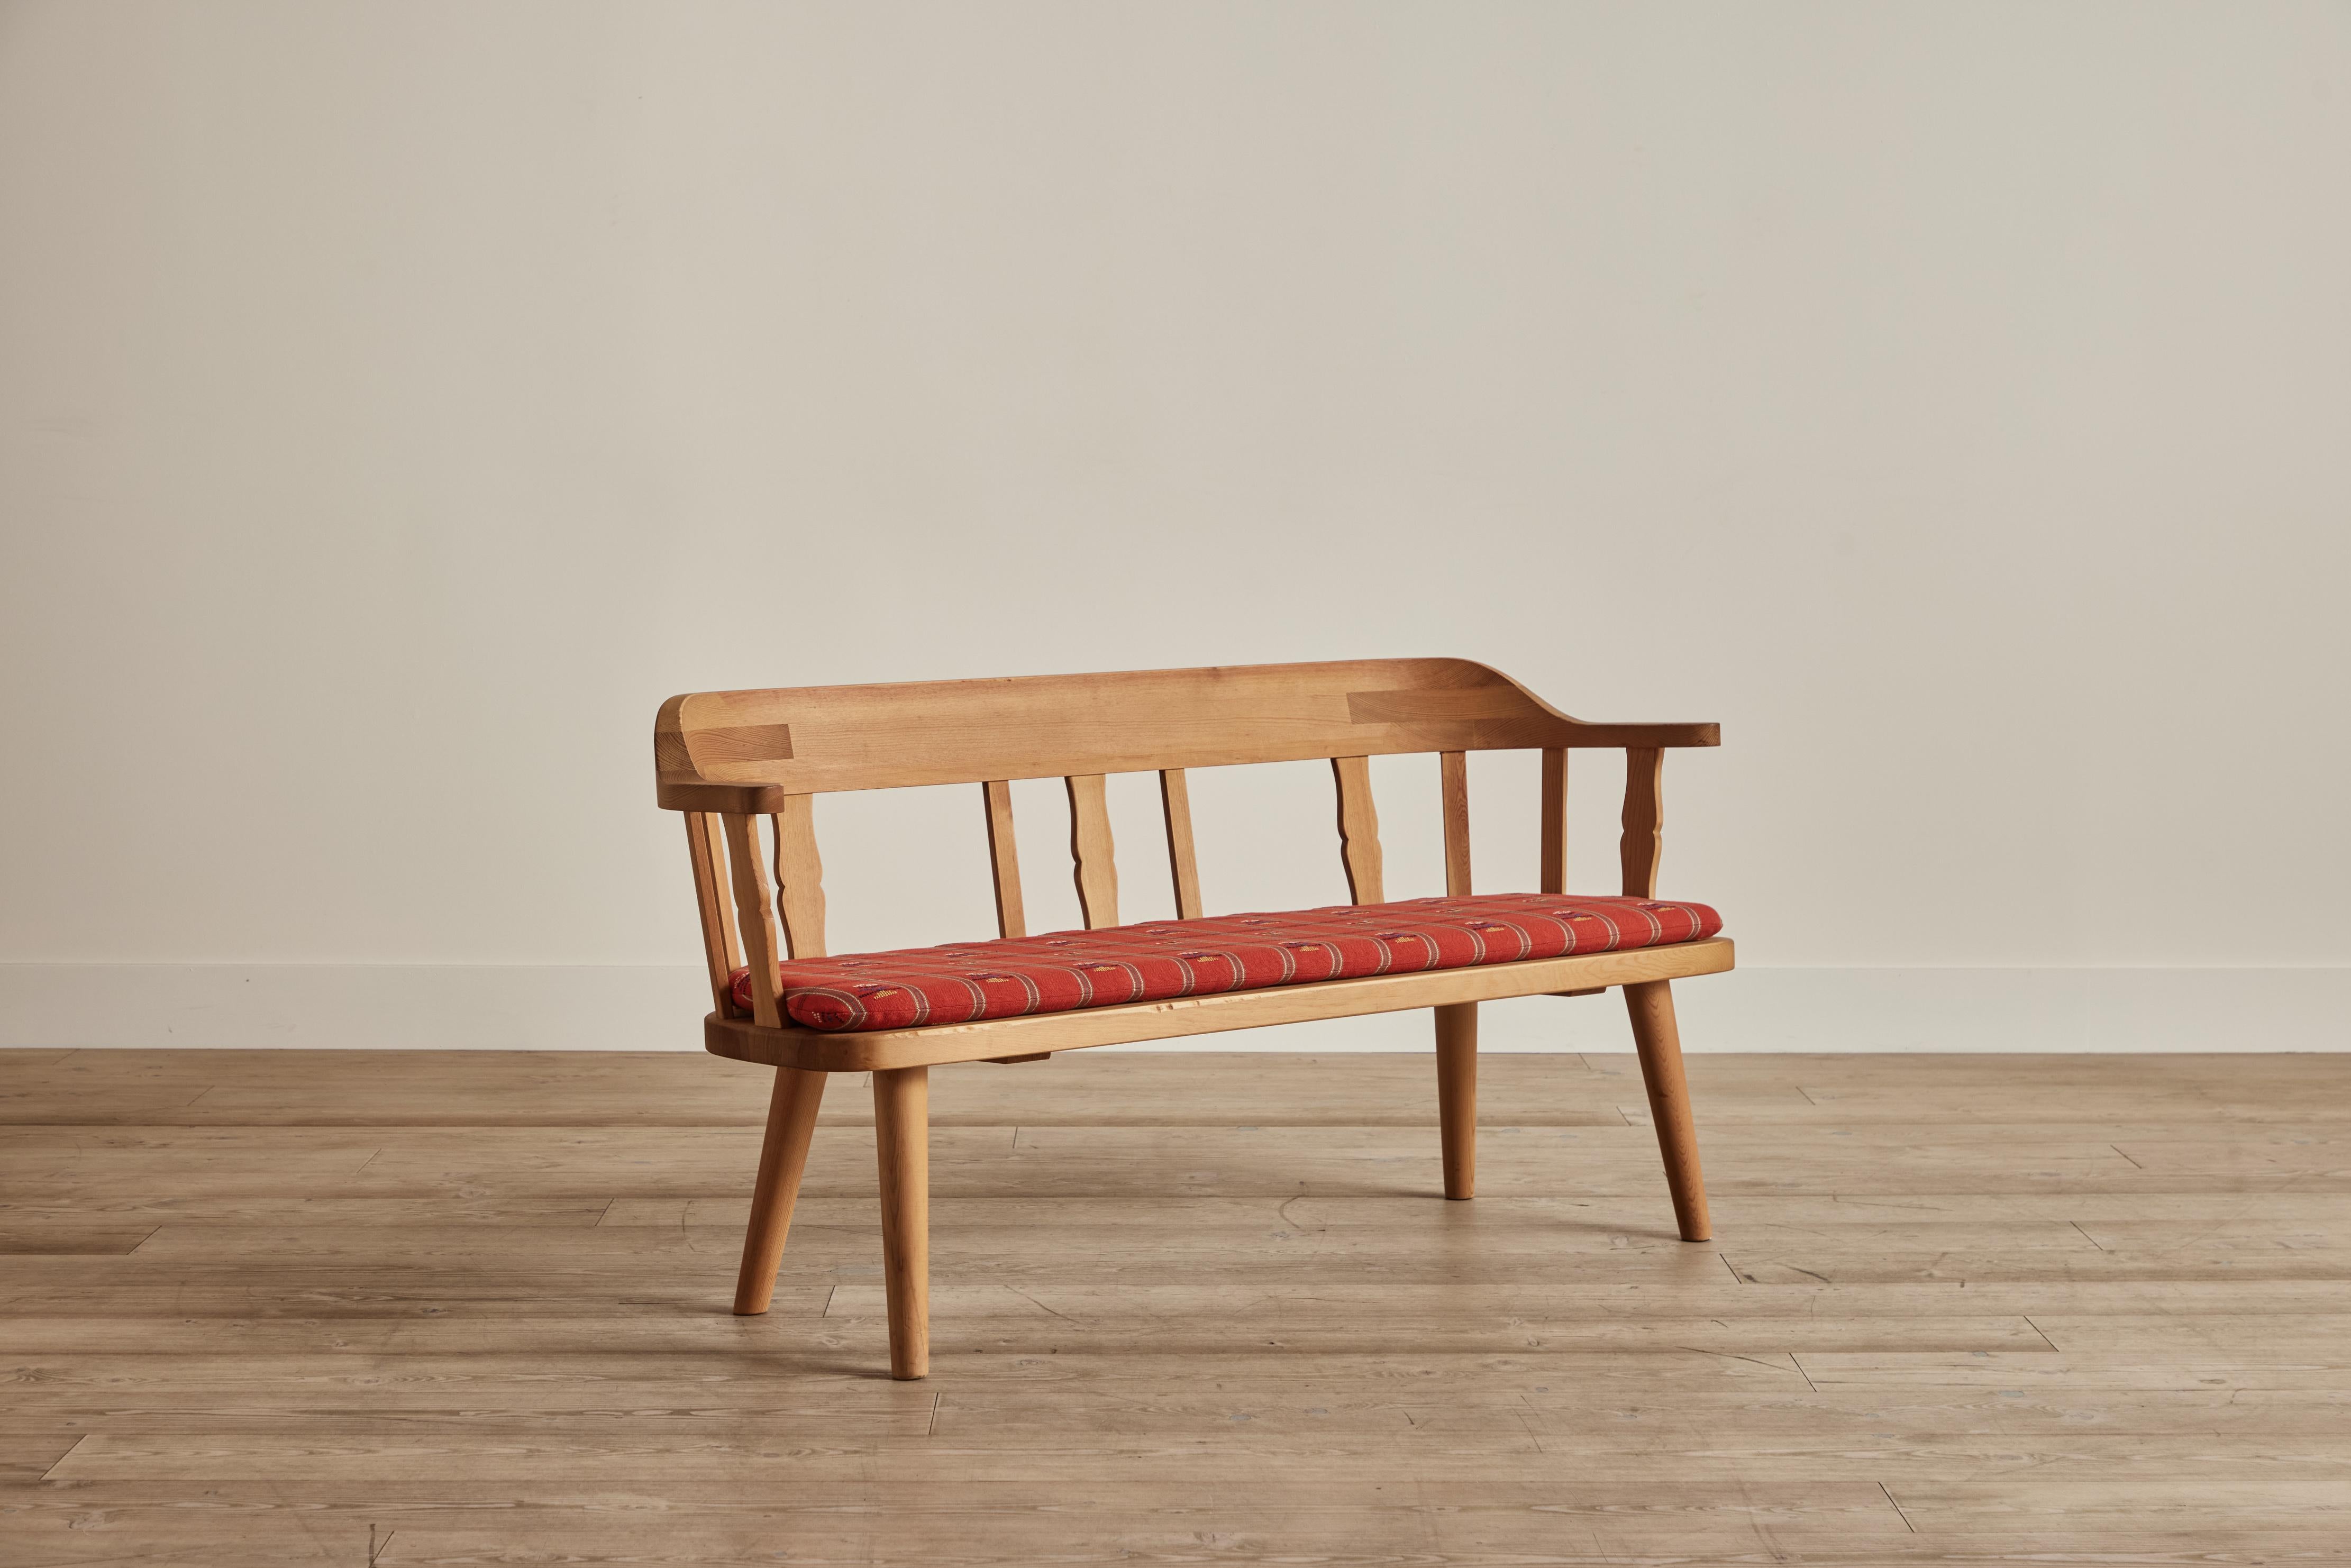 Pine bench with original fabric cushions by Krogenäs Möbler from Norway circa 1970. Some wear on pine wood that is consistent with age and use.